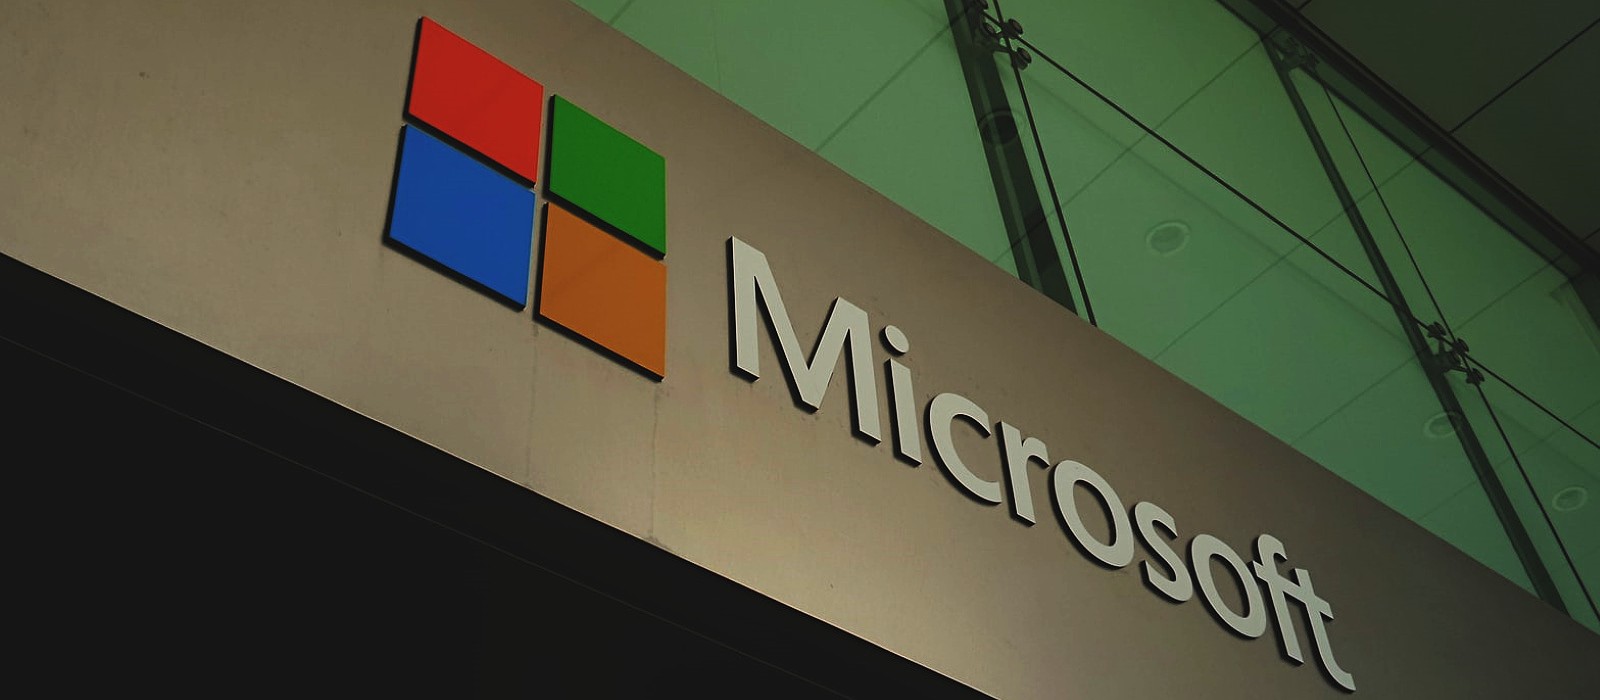 Microsoft paid almost $14M in bounties over the last 12 months